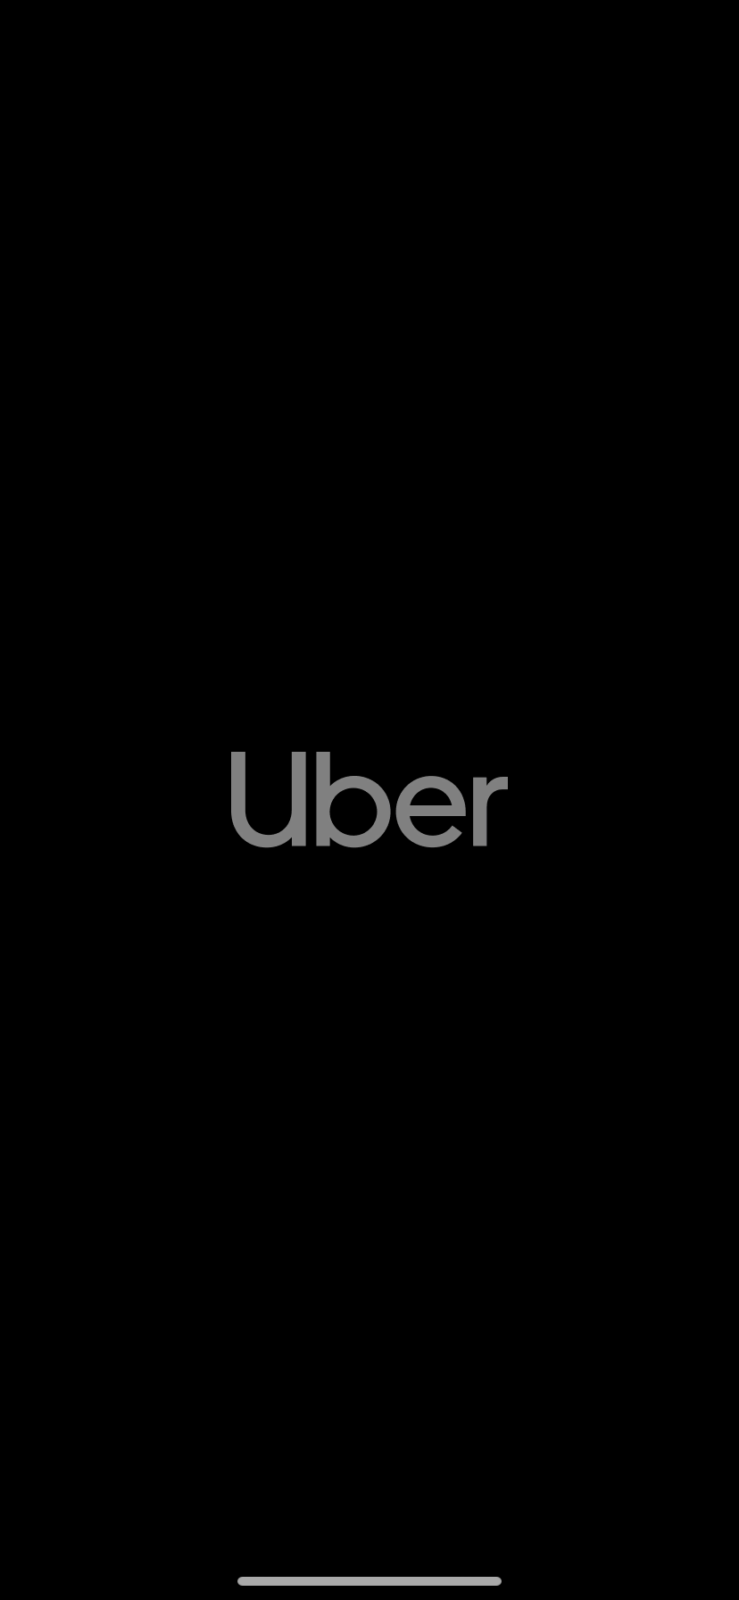 Uber Sued By 550 Women Who Claim They Were Sexually Assaulted By Drivers According To Reports